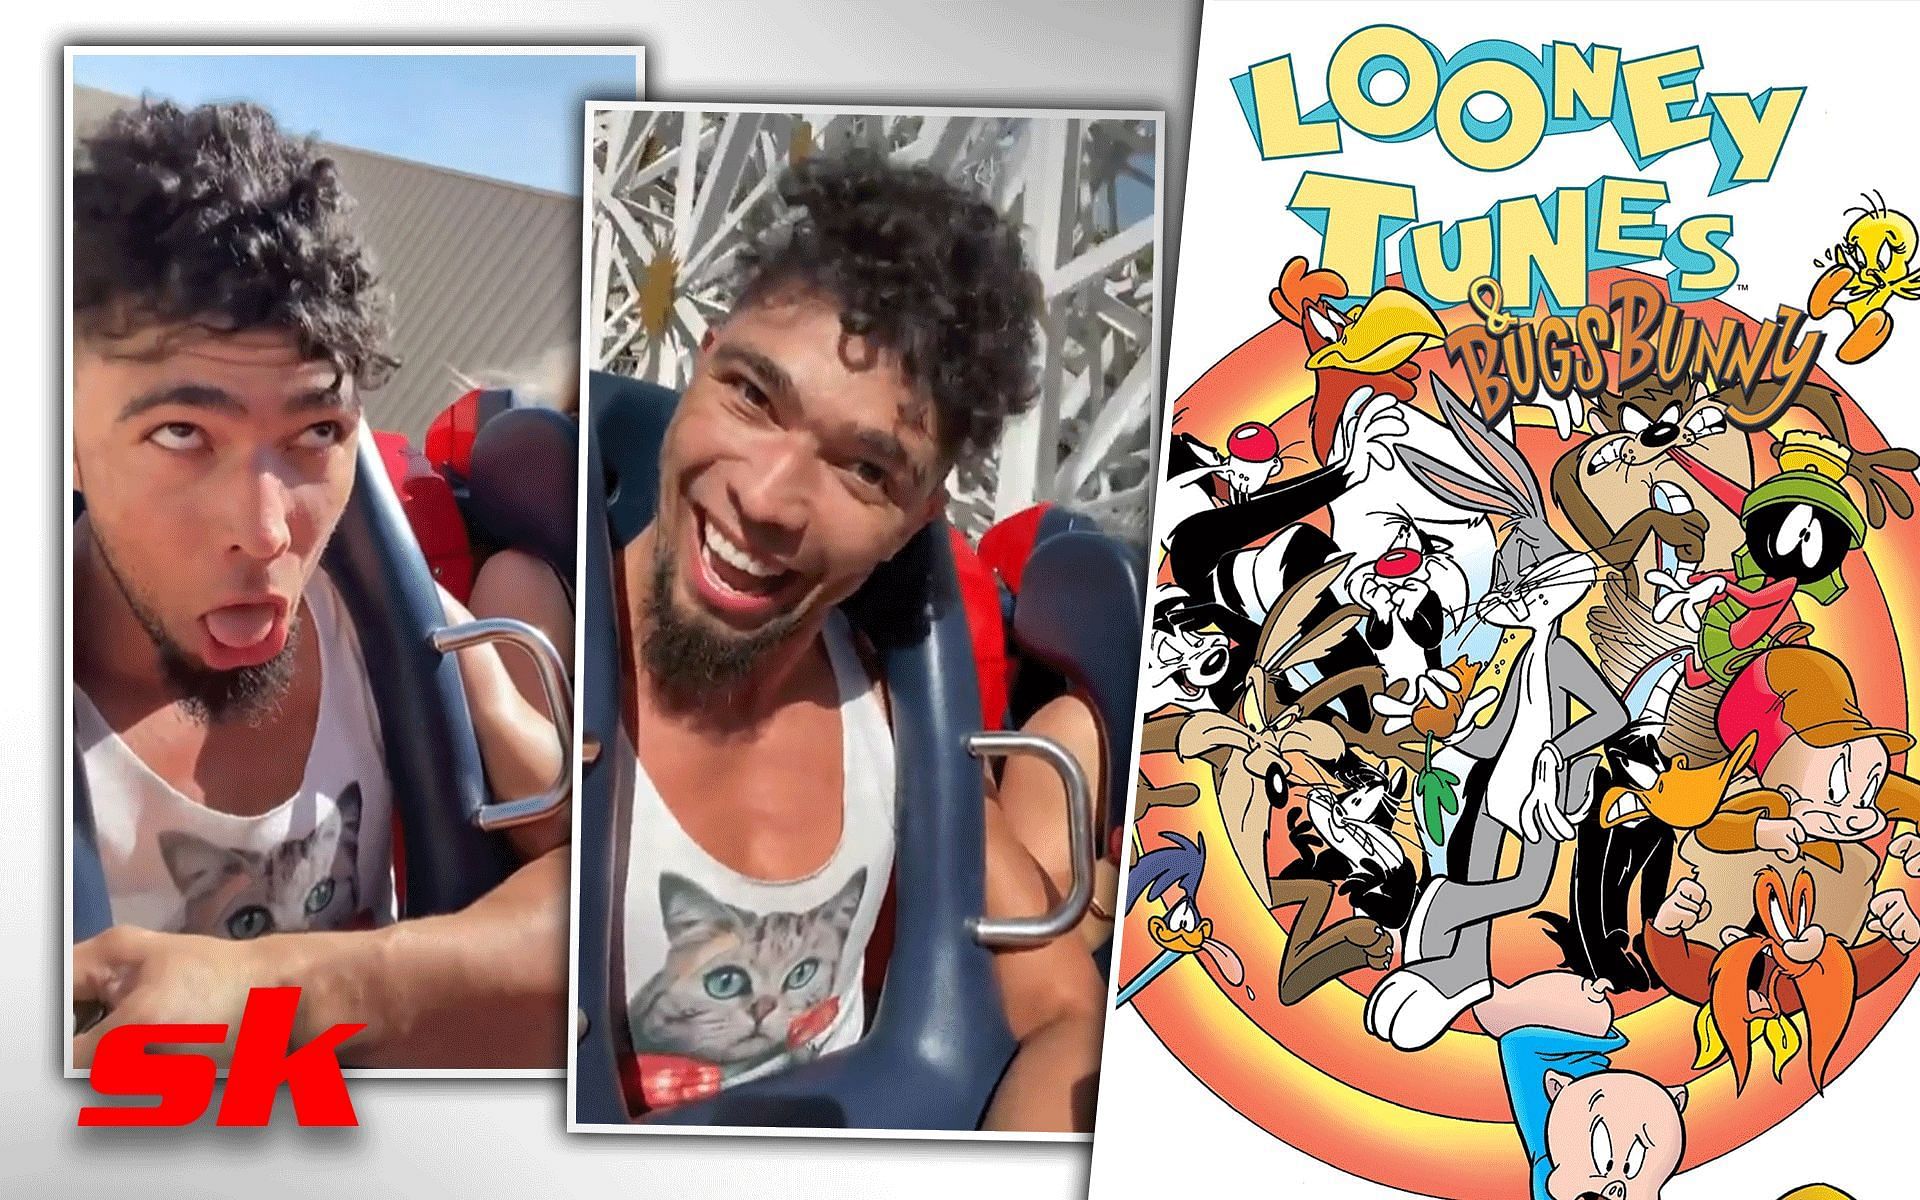 Fans start Reddit thread on Johnny Walker pretending to pass out while riding roller coaster [Images via, Looney Tunes from imdb.com, rest from MrTBone00 reddit]